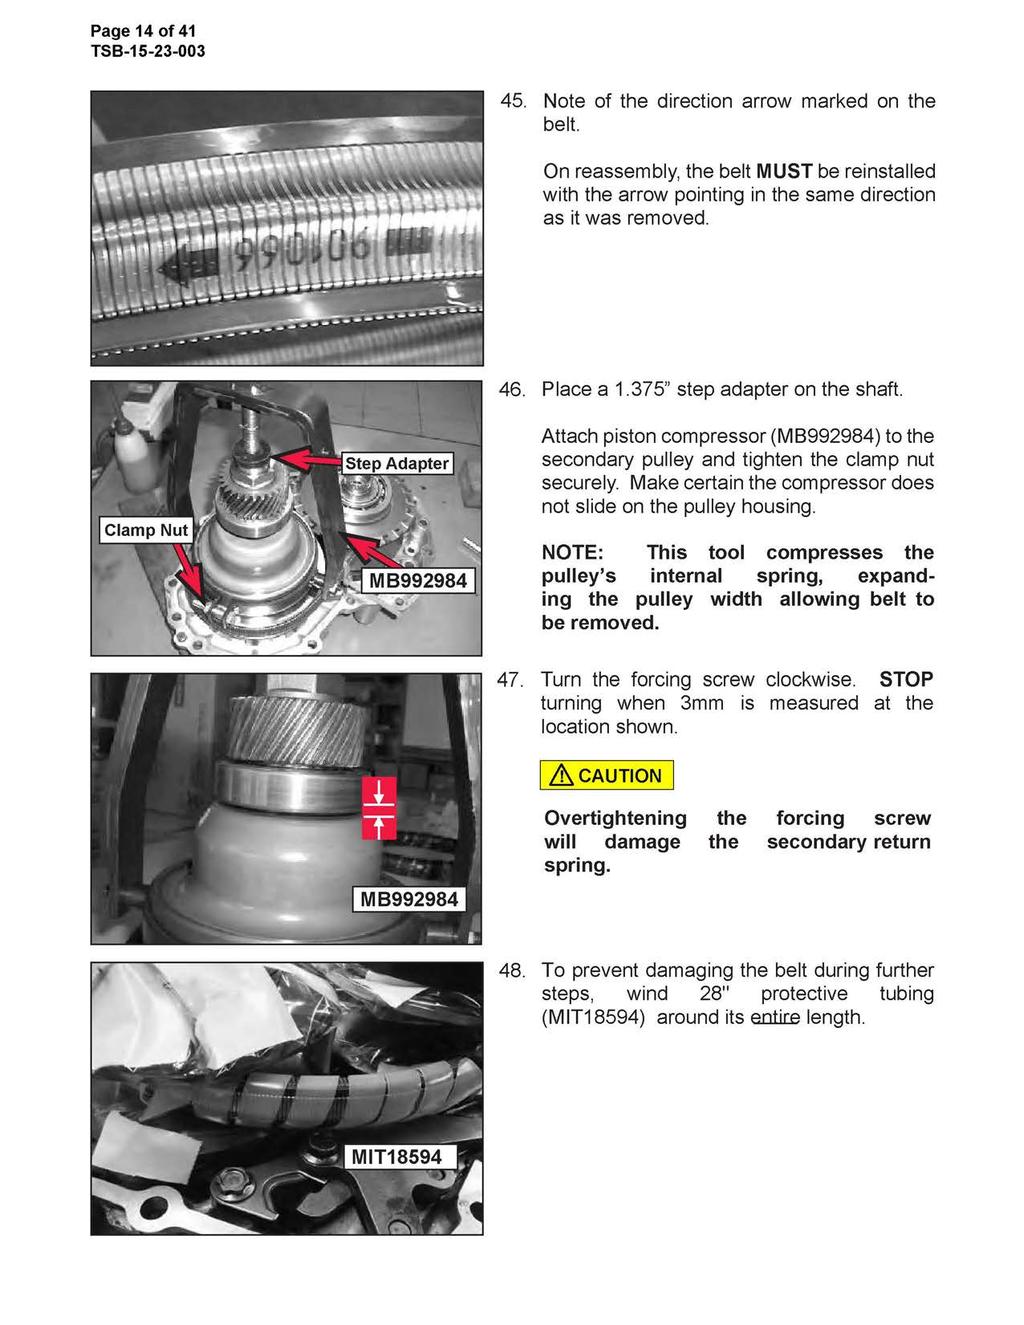 Page 14 of 41 45. Note of the direction arrow marked on the belt. On reassembly, the belt MUST be reinstalled with the arrow pointing in the same direction as it was removed. 46. Place a 1.